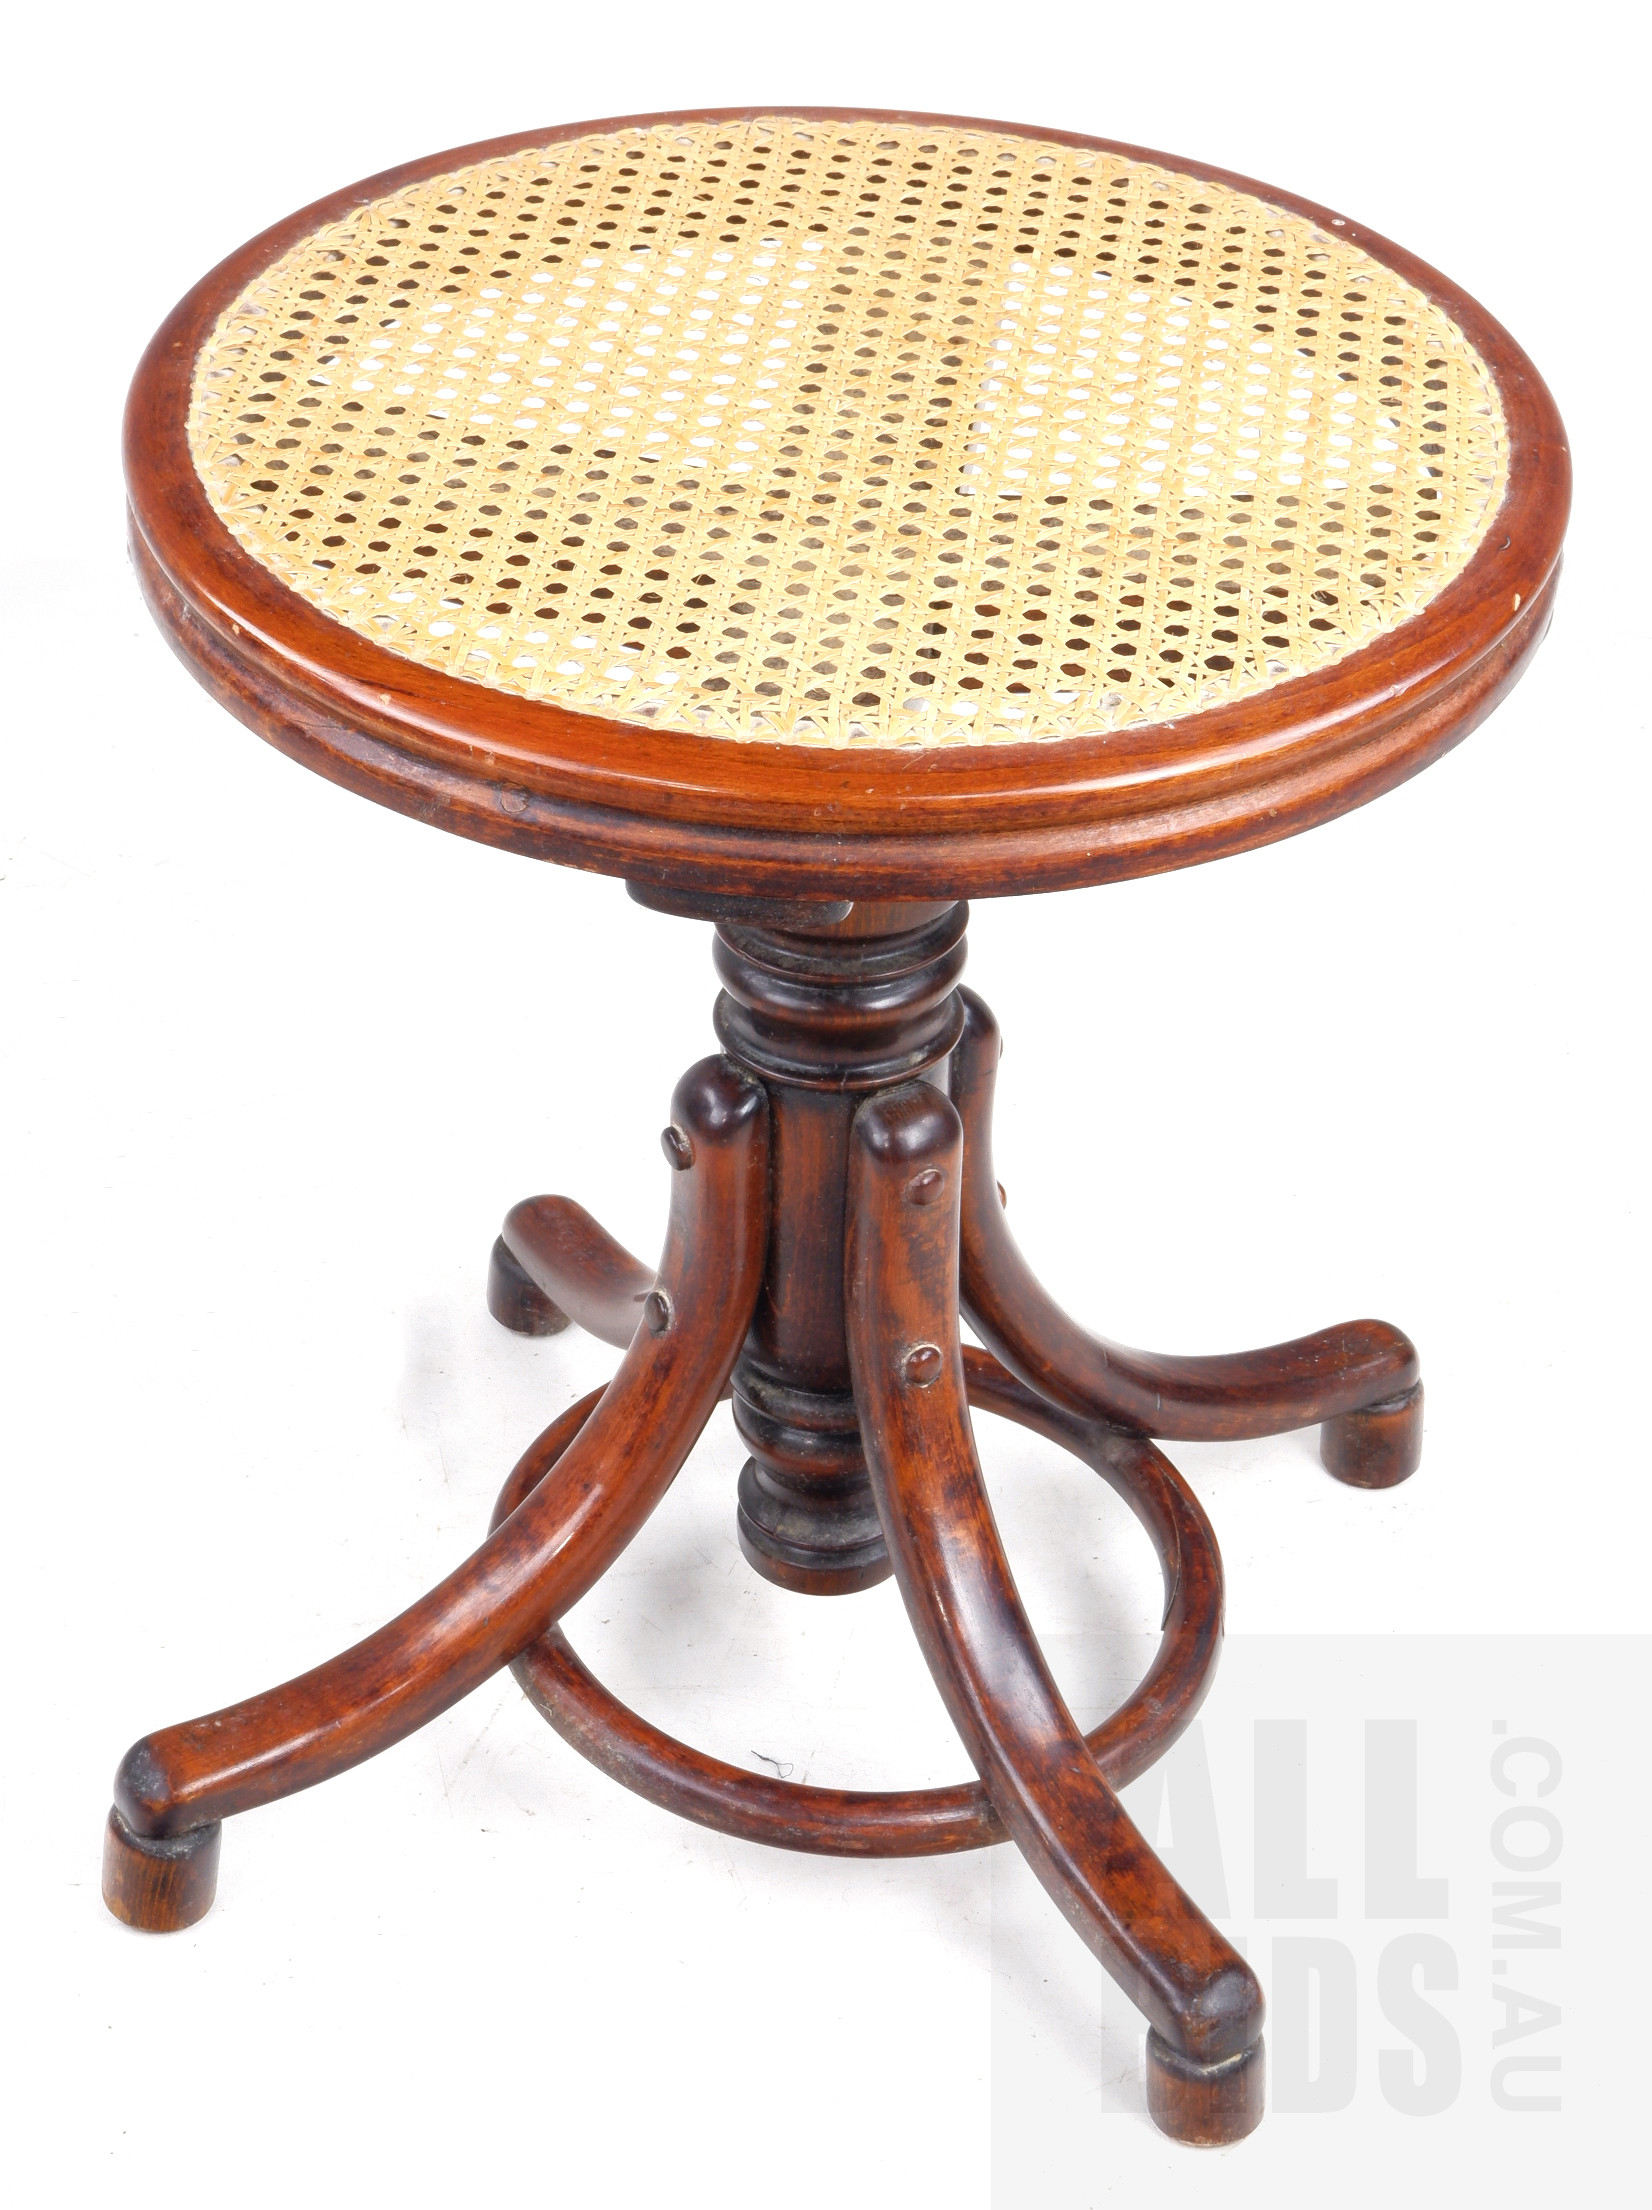 'Thonet Bentwood and Rattan Piano Stool, Late 19th Century'